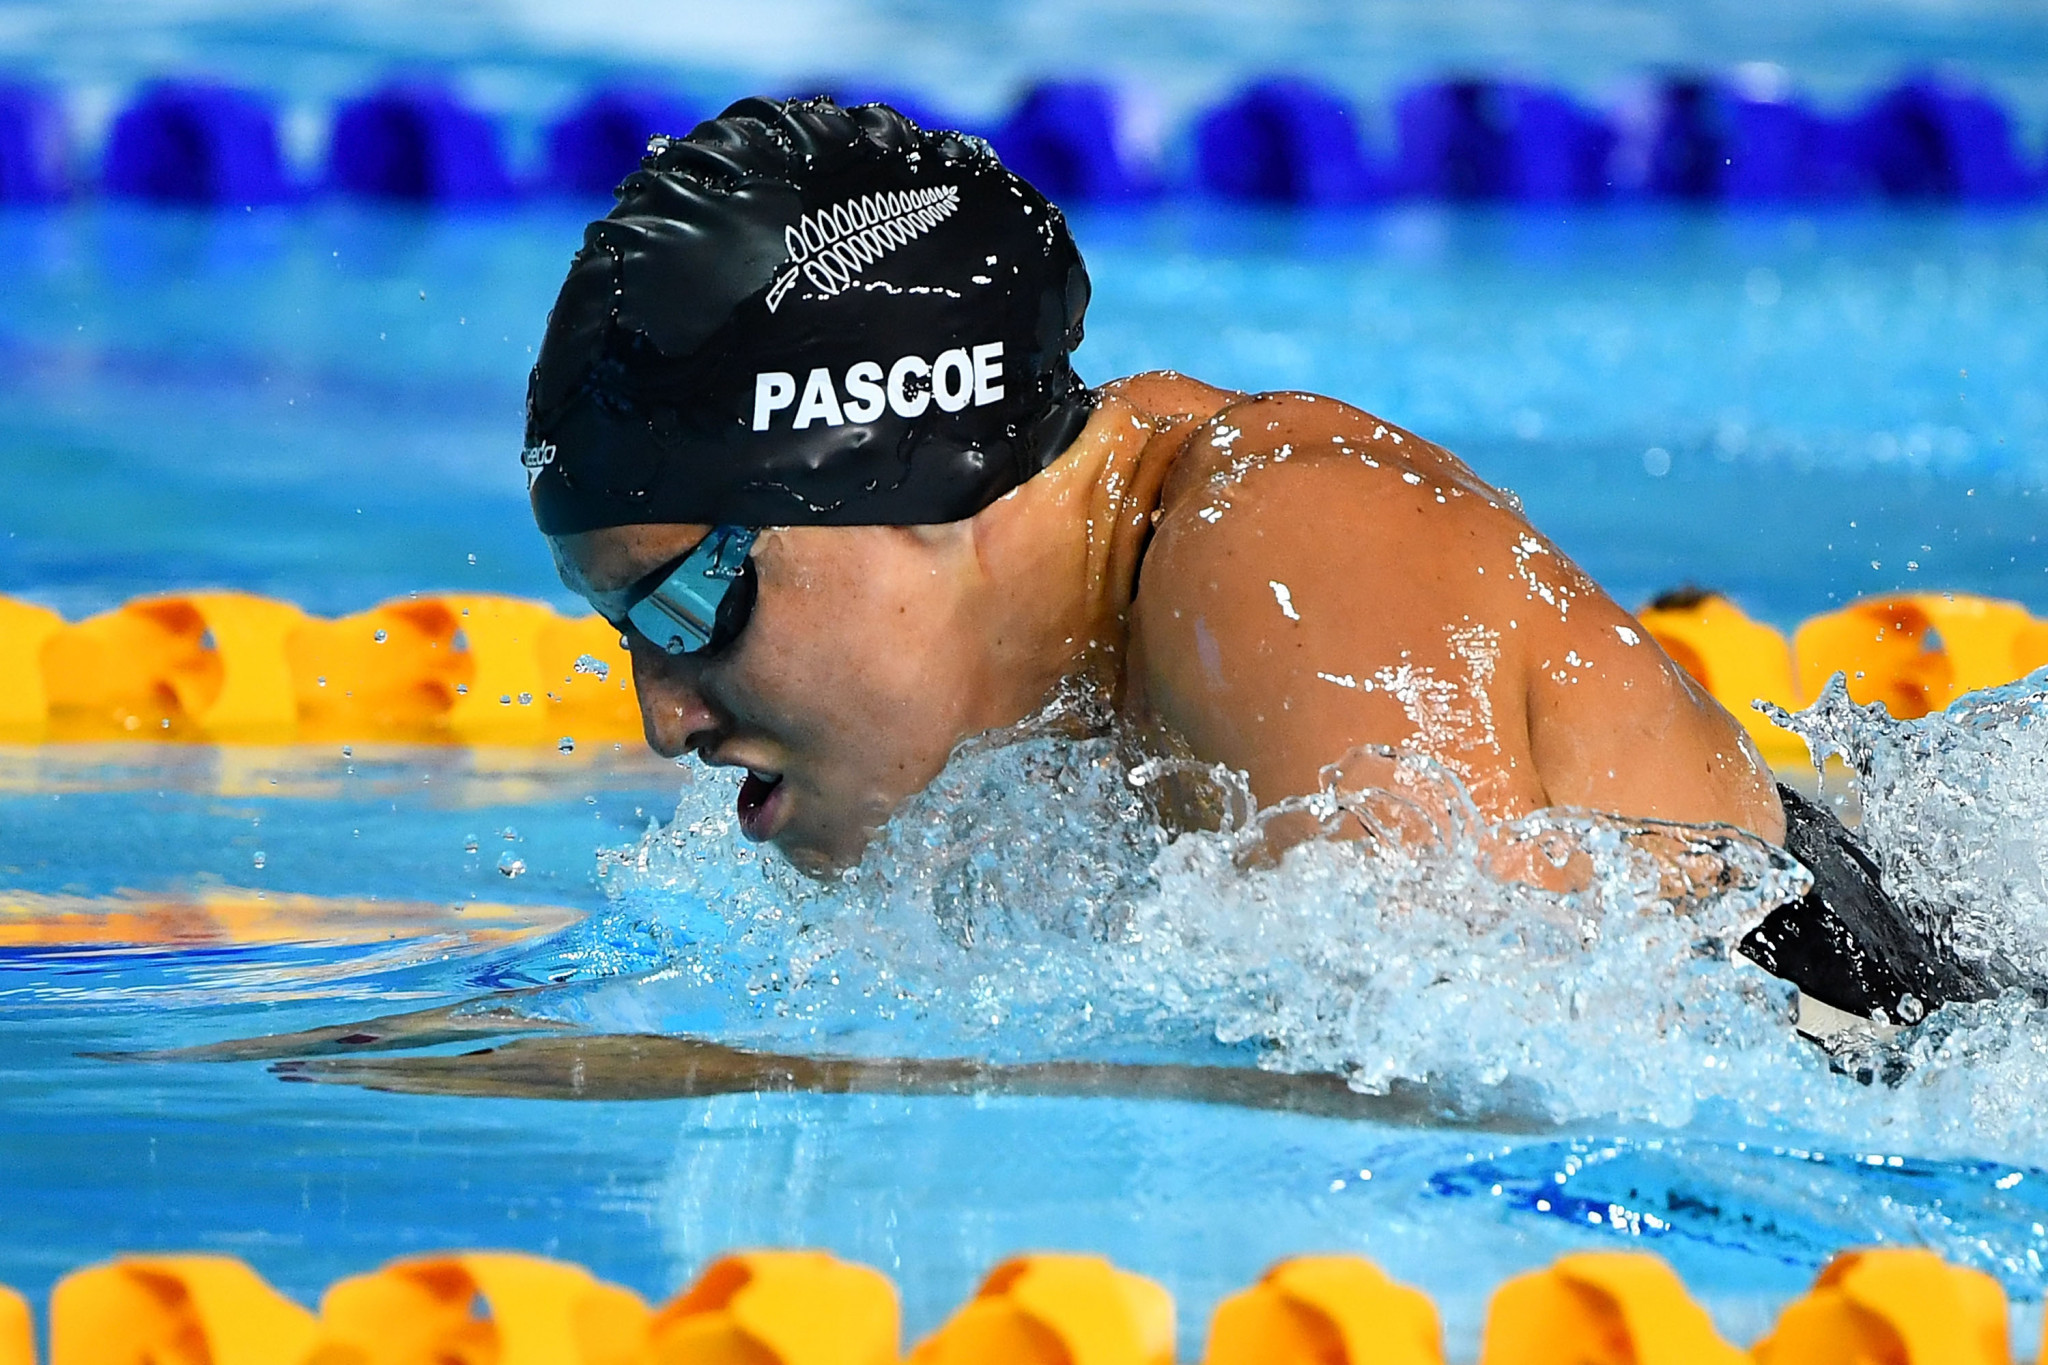 Swimming star Pascoe nominated for IPC Athlete of the Month 